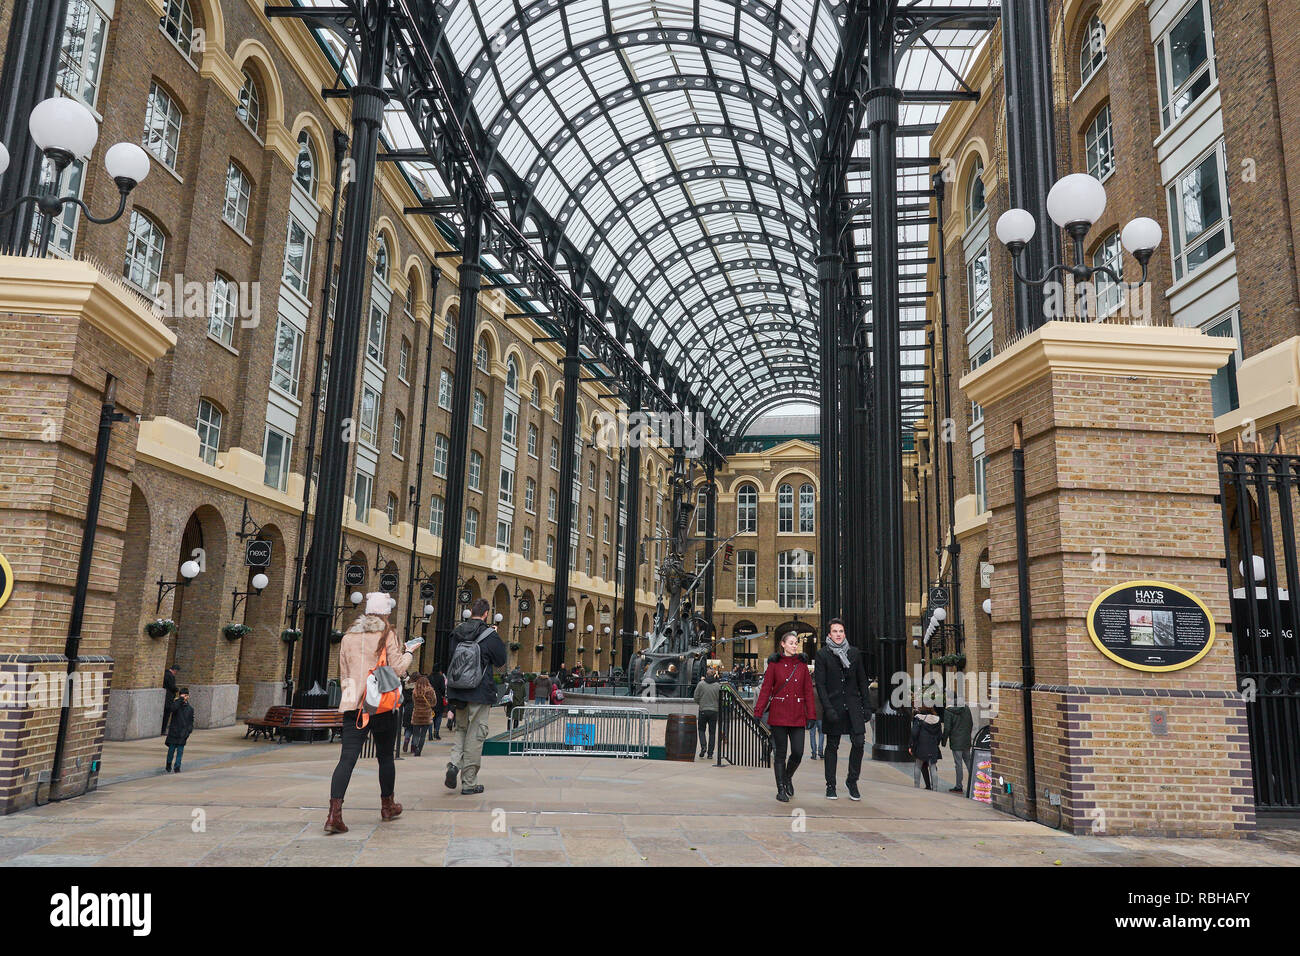 Hays Galleria, on the soth bank of the river Thames, London, England, formerly a wharf and dock for imported dry foodstuffs, now a covered shopping an Stock Photo